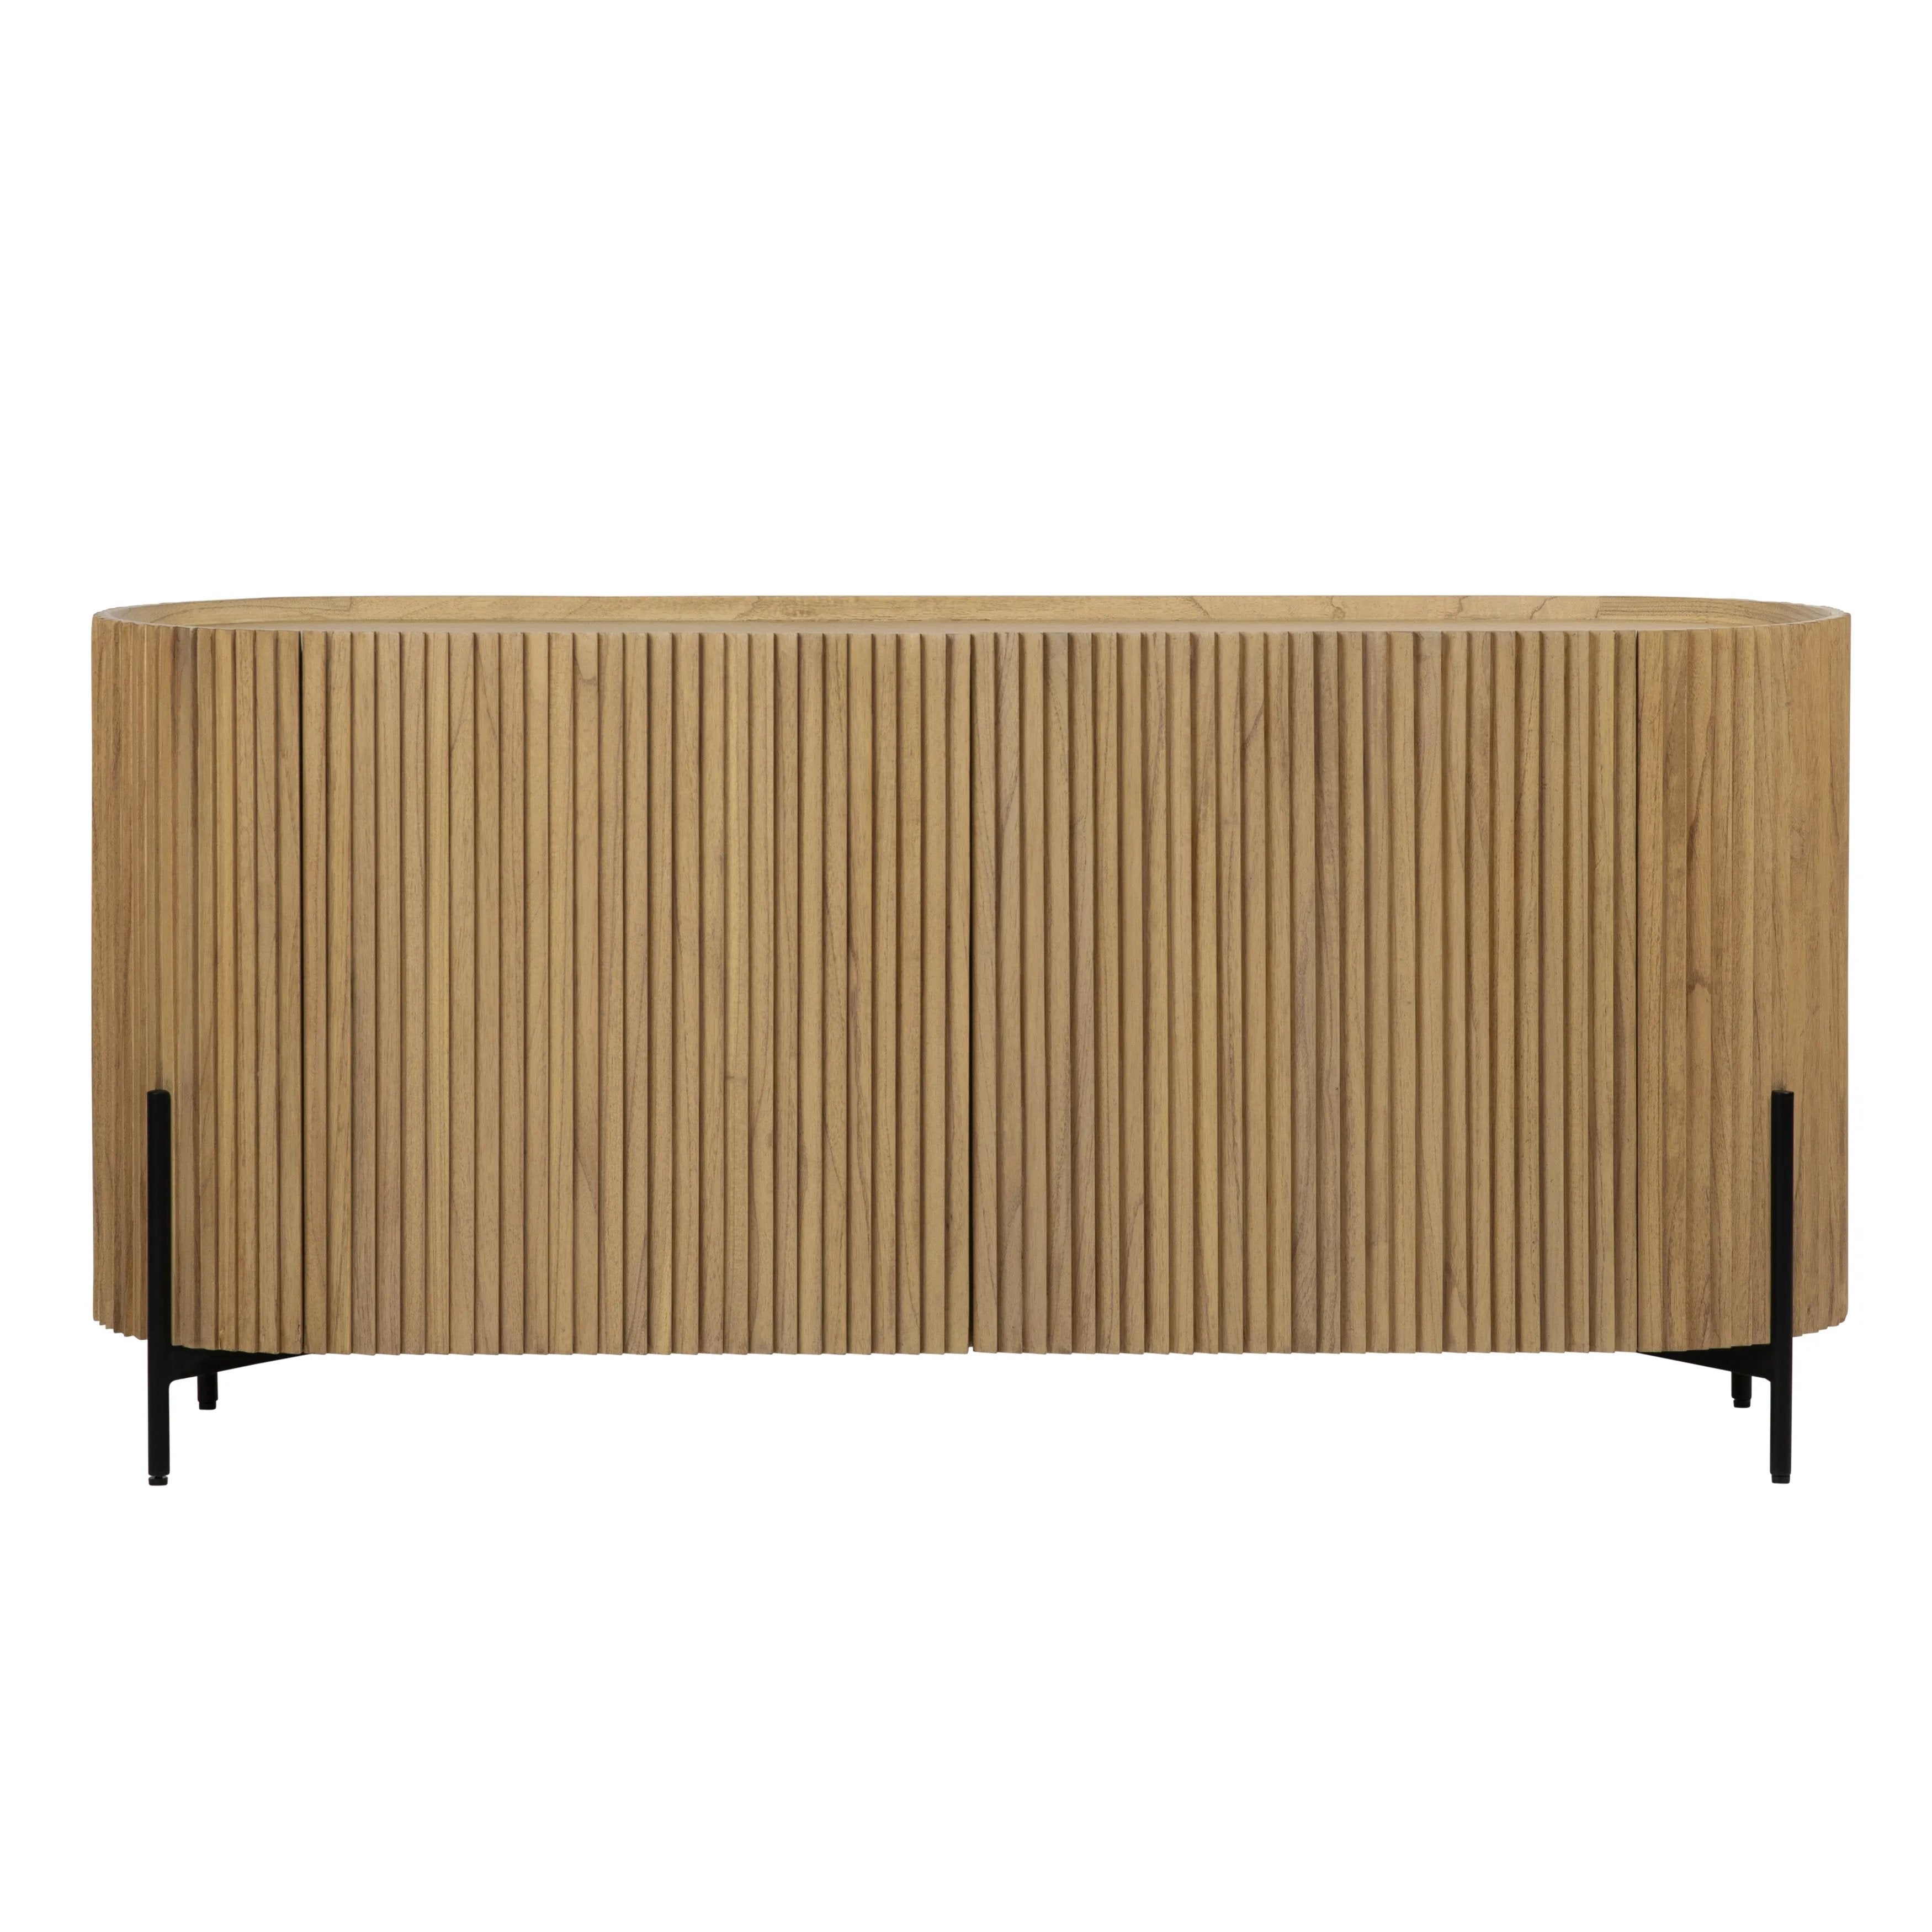 Our Tulu Sideboard elevates your entertainment area with a sophisticated, streamlined silhouette. Delicately crafted with an exquisite blend of Mindi and Veneer woods in a flaunting textural effect. Featuring a striking oval shape with two butterfly doors that open four roomy interior shelves Amethyst Home provides interior design, new home construction design consulting, vintage area rugs, and lighting in the Salt Lake City metro area.